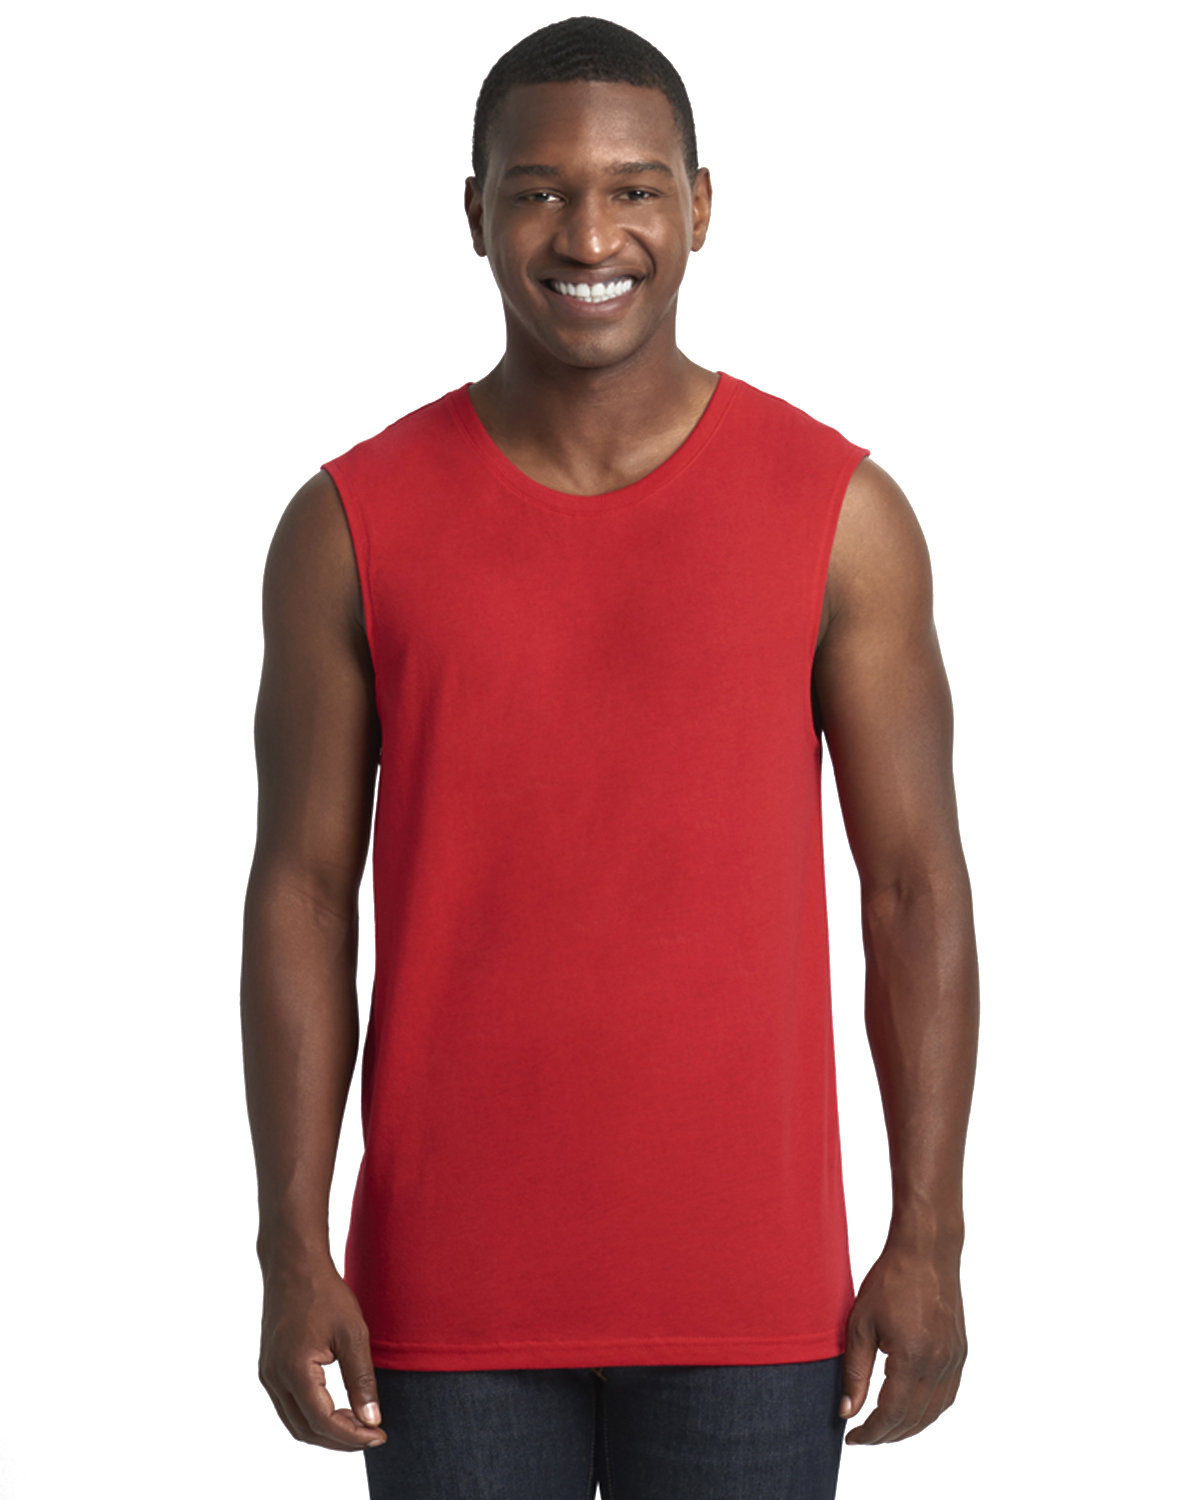 Next Level Apparel Men's Muscle Tank RED 